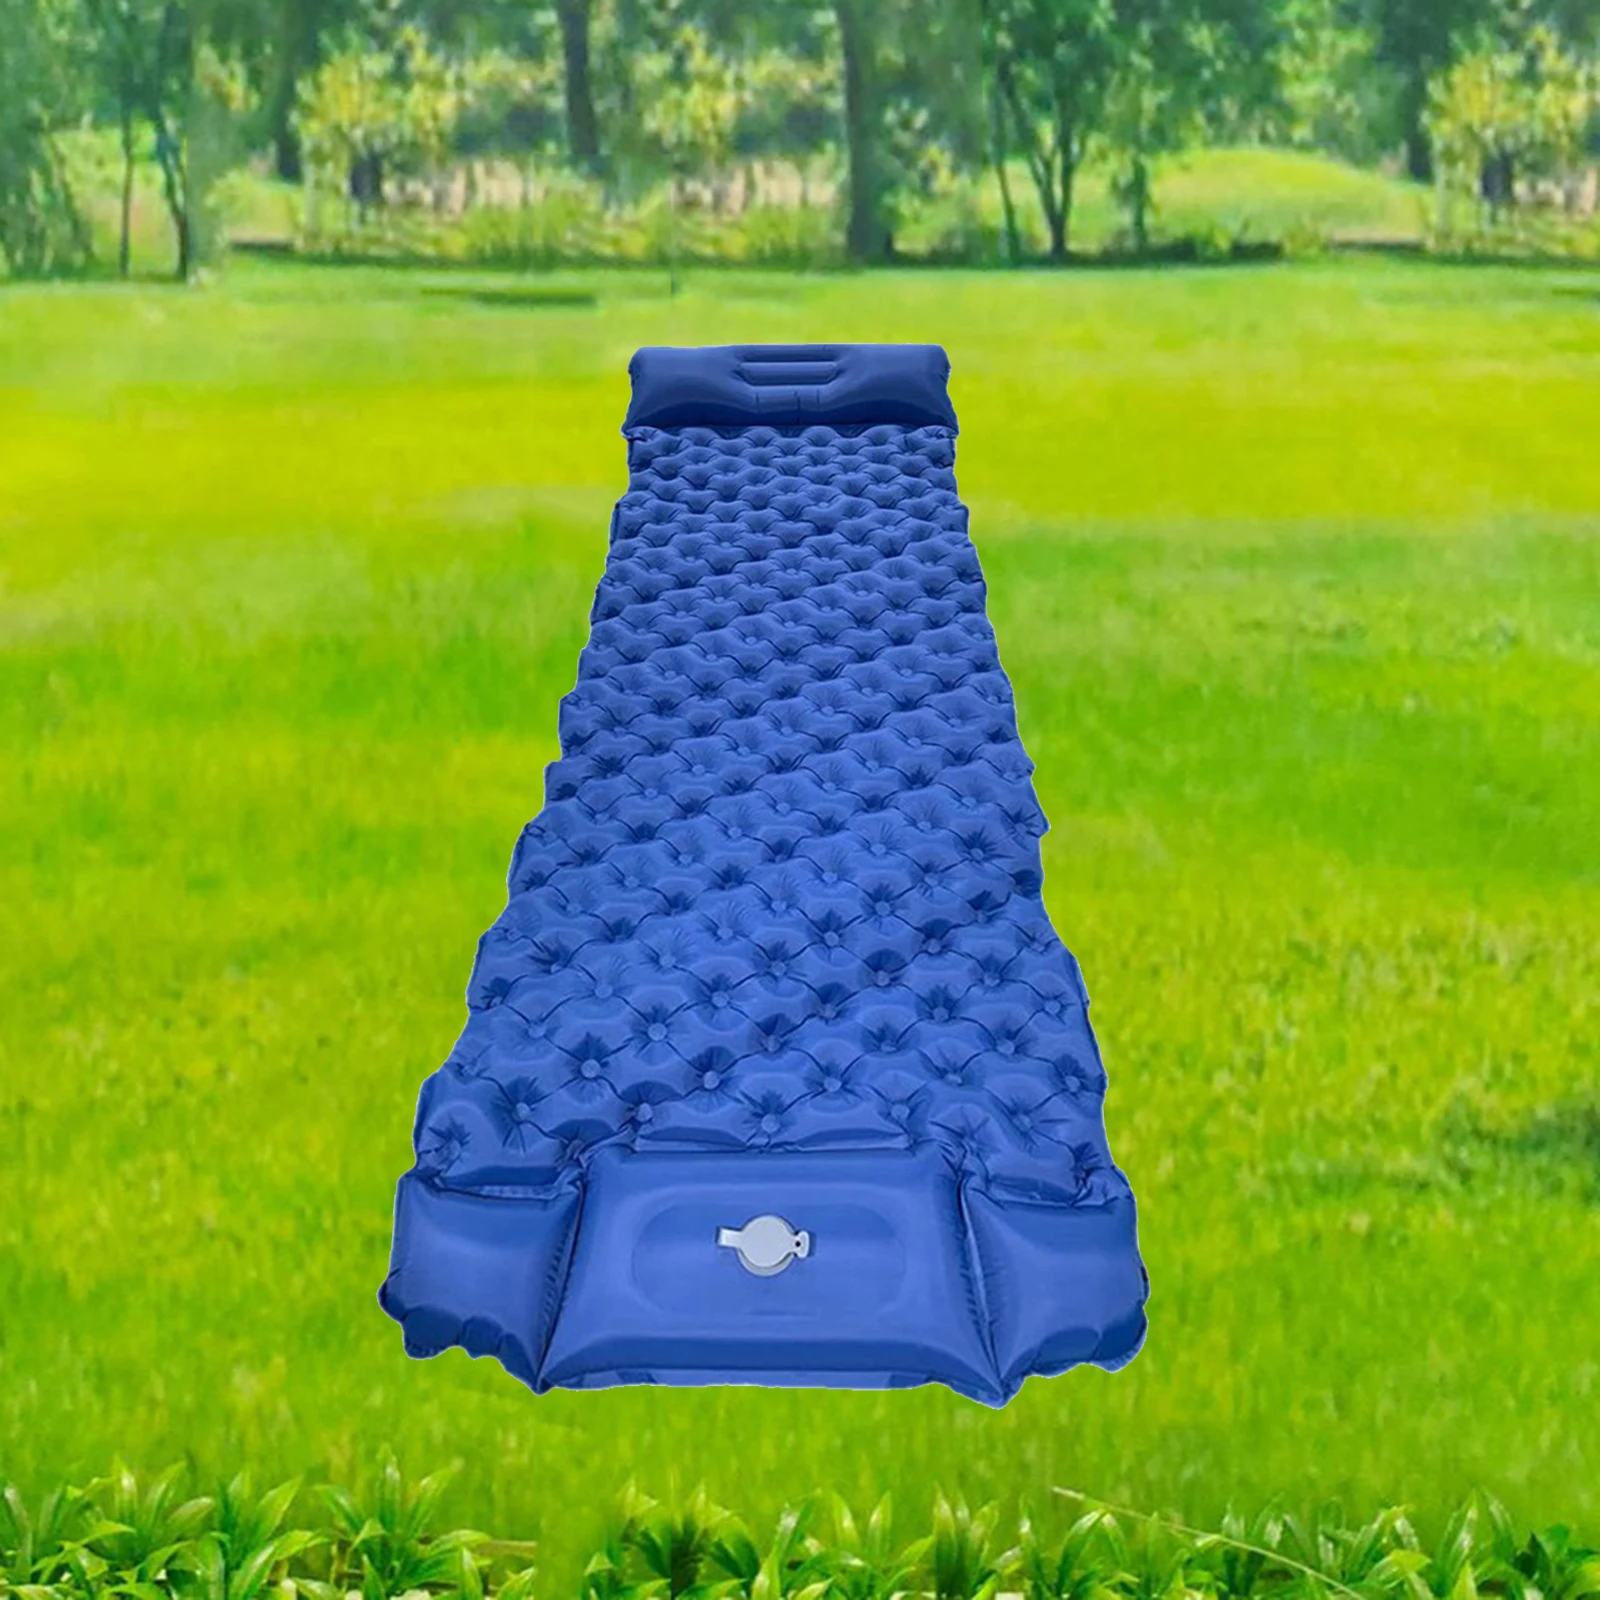 Outdoor Inflatable Sleeping Pad Inflatable Air Cushion Camping Mat with Pillow Air Mattress Sleeping Cushion Inflatable Sofa